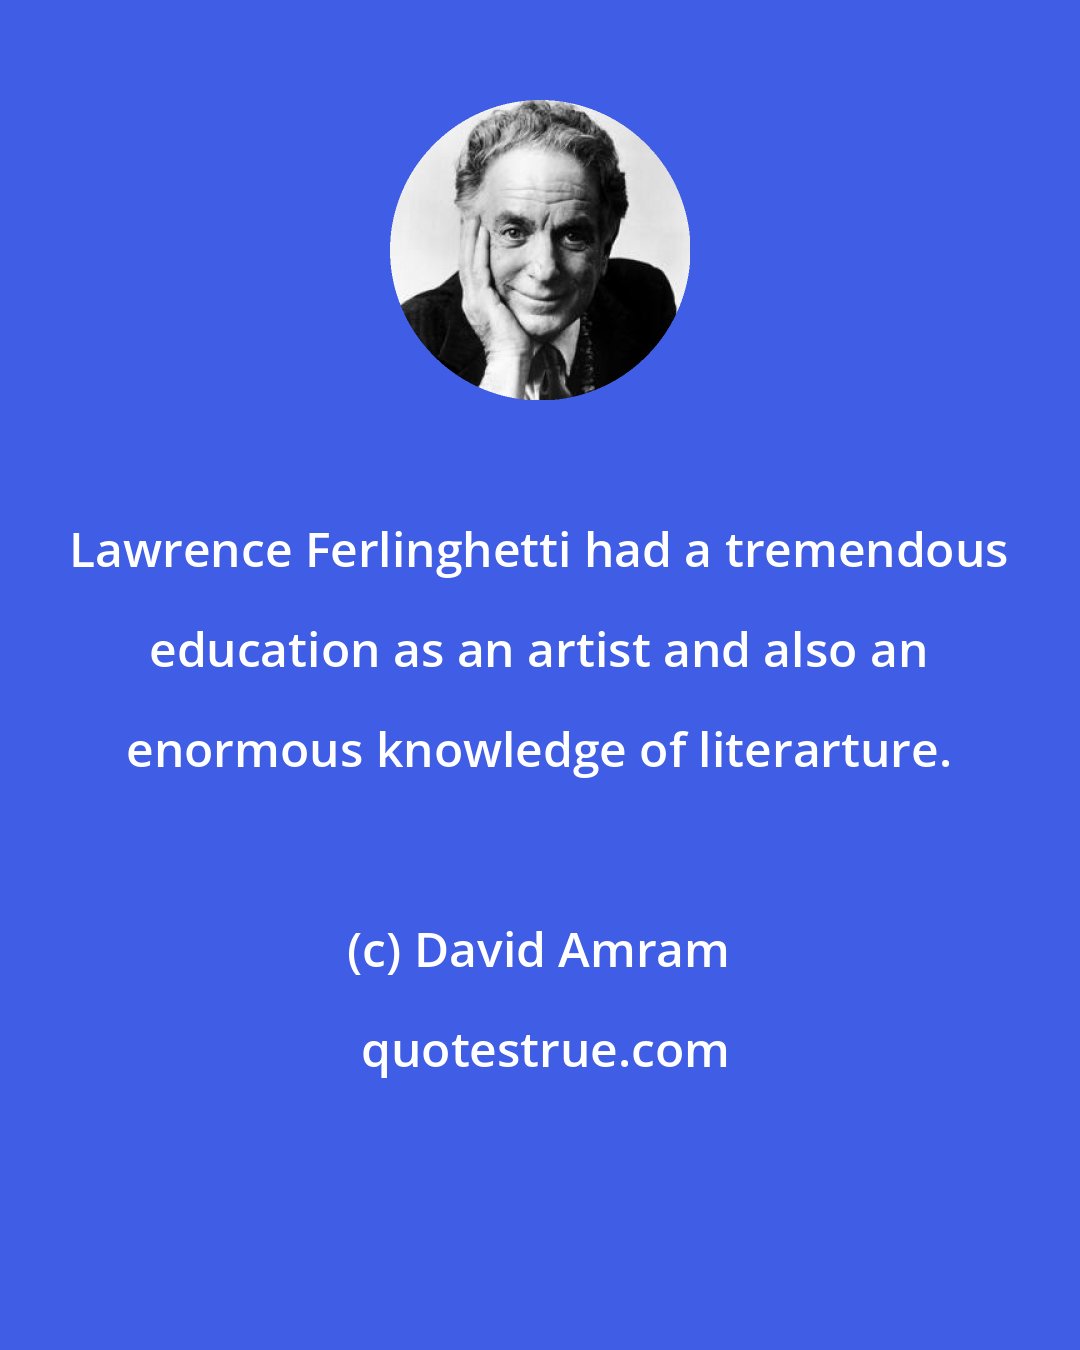 David Amram: Lawrence Ferlinghetti had a tremendous education as an artist and also an enormous knowledge of literarture.